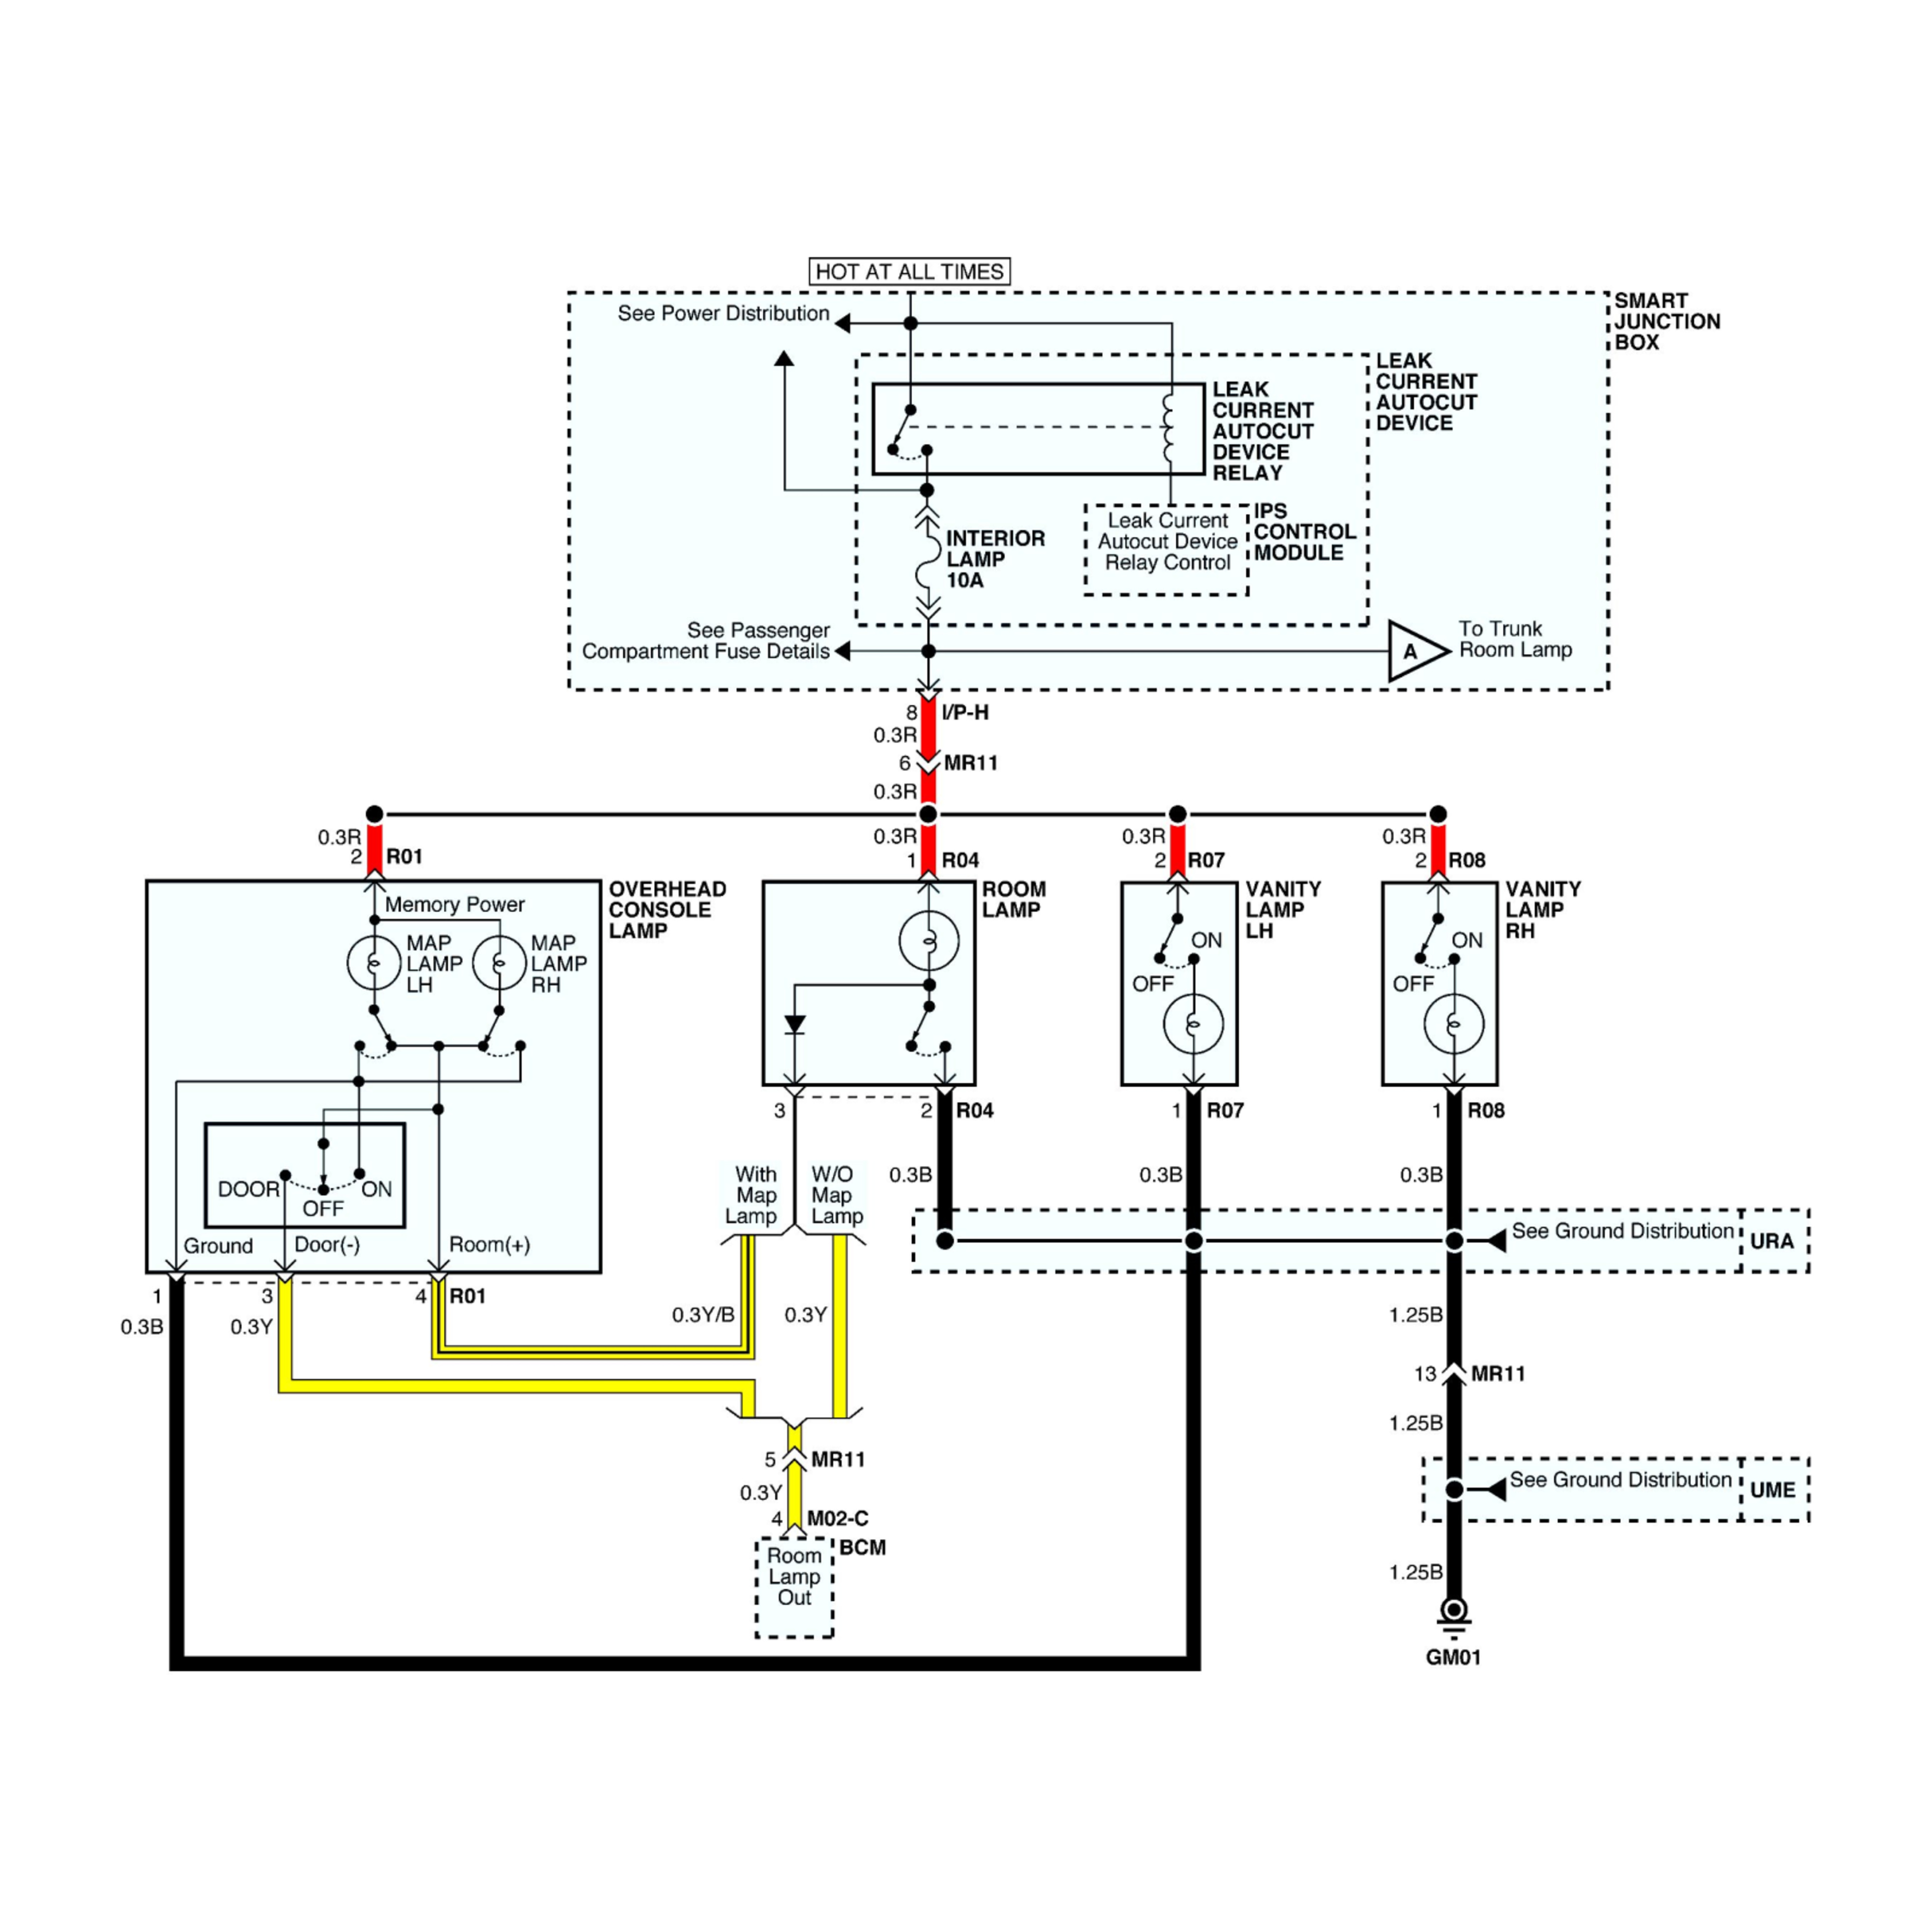 1997 Saturn SW2 wiring diagrams example